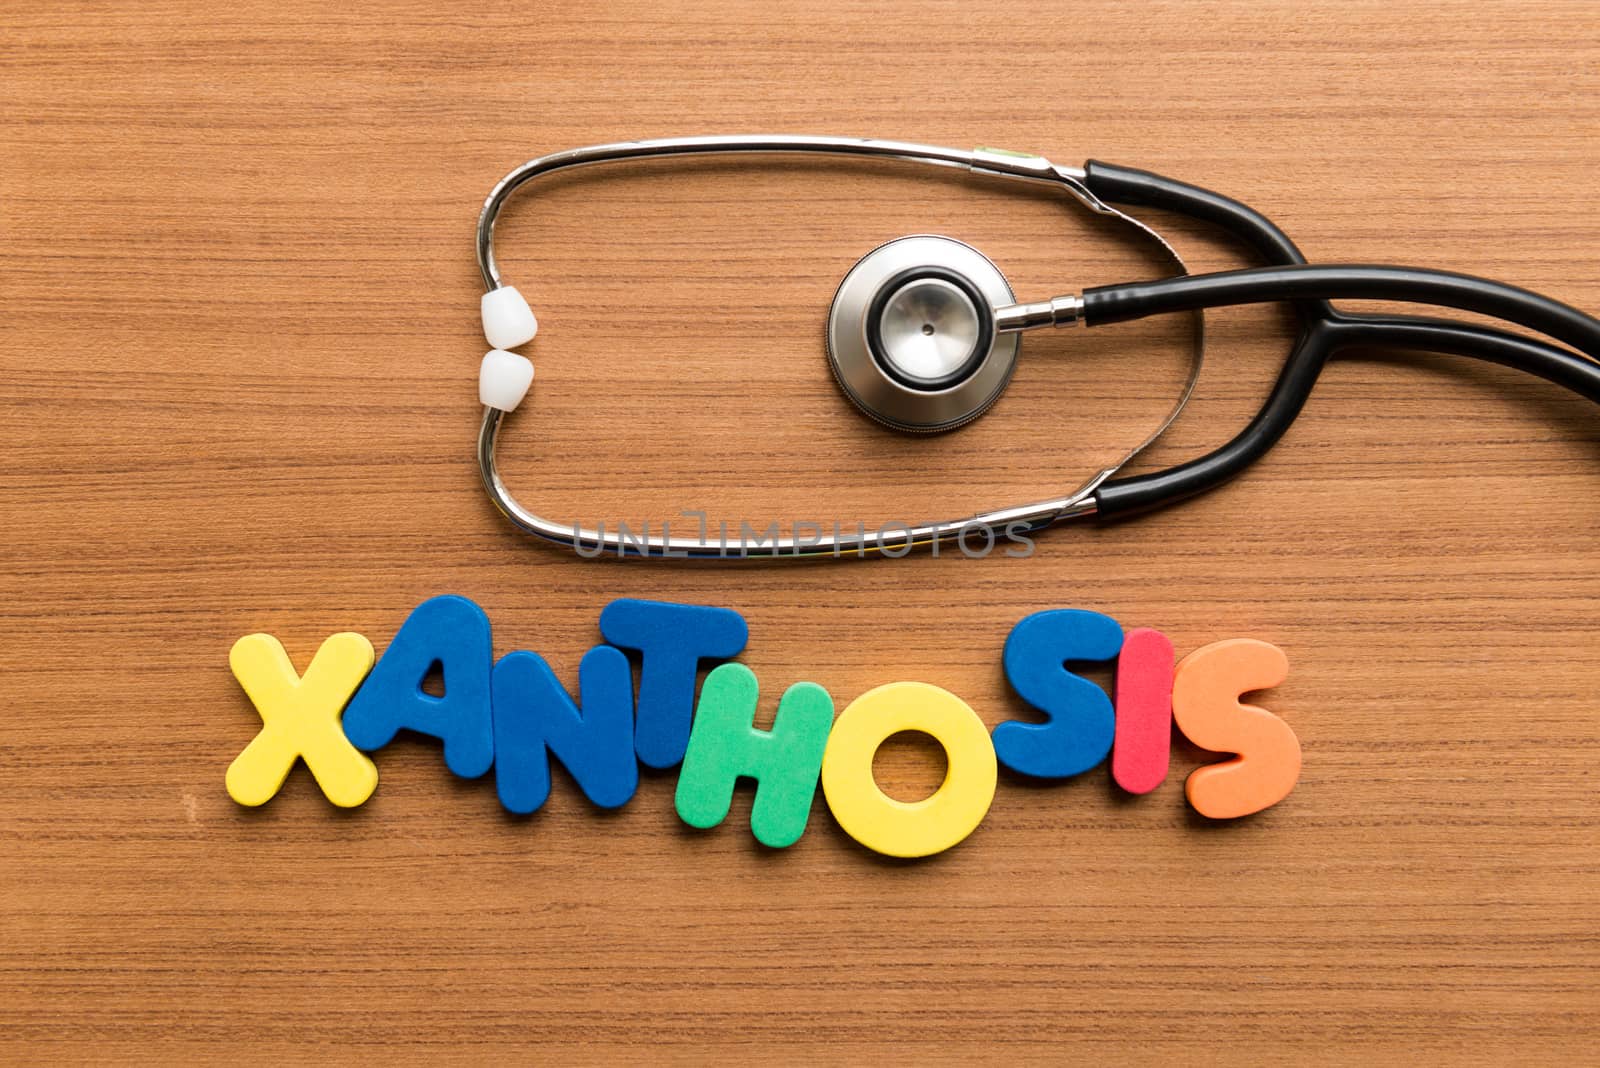 xanthosis colorful word with stethoscope by sohel.parvez@hotmail.com